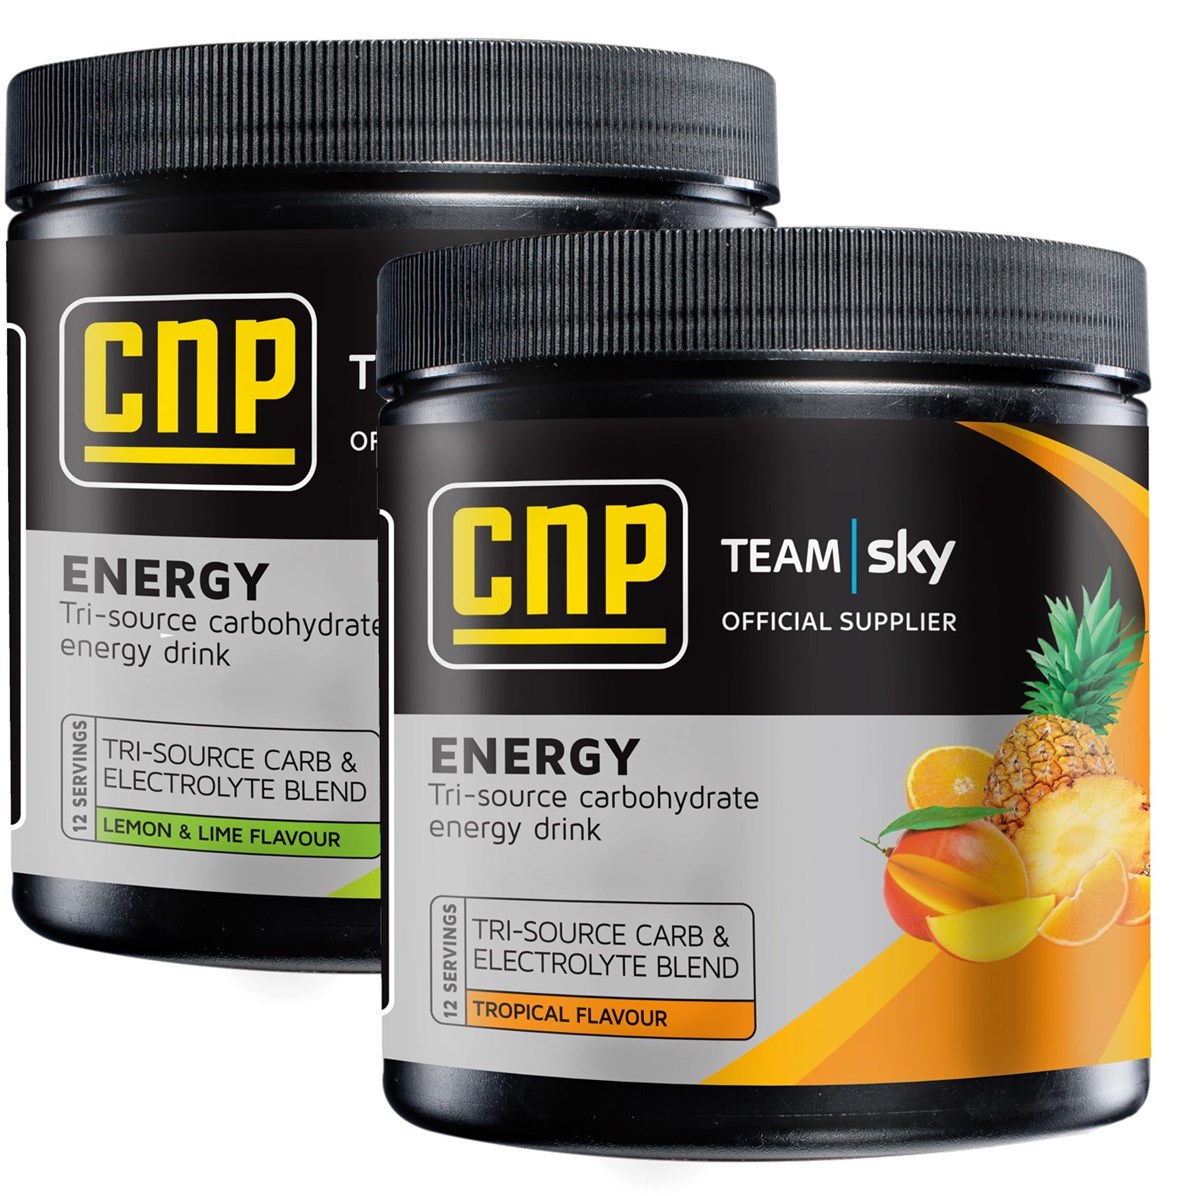 CNP Energy Powder Drink with Tri-Source Carbohydrates - 1 x 385g Tub product image